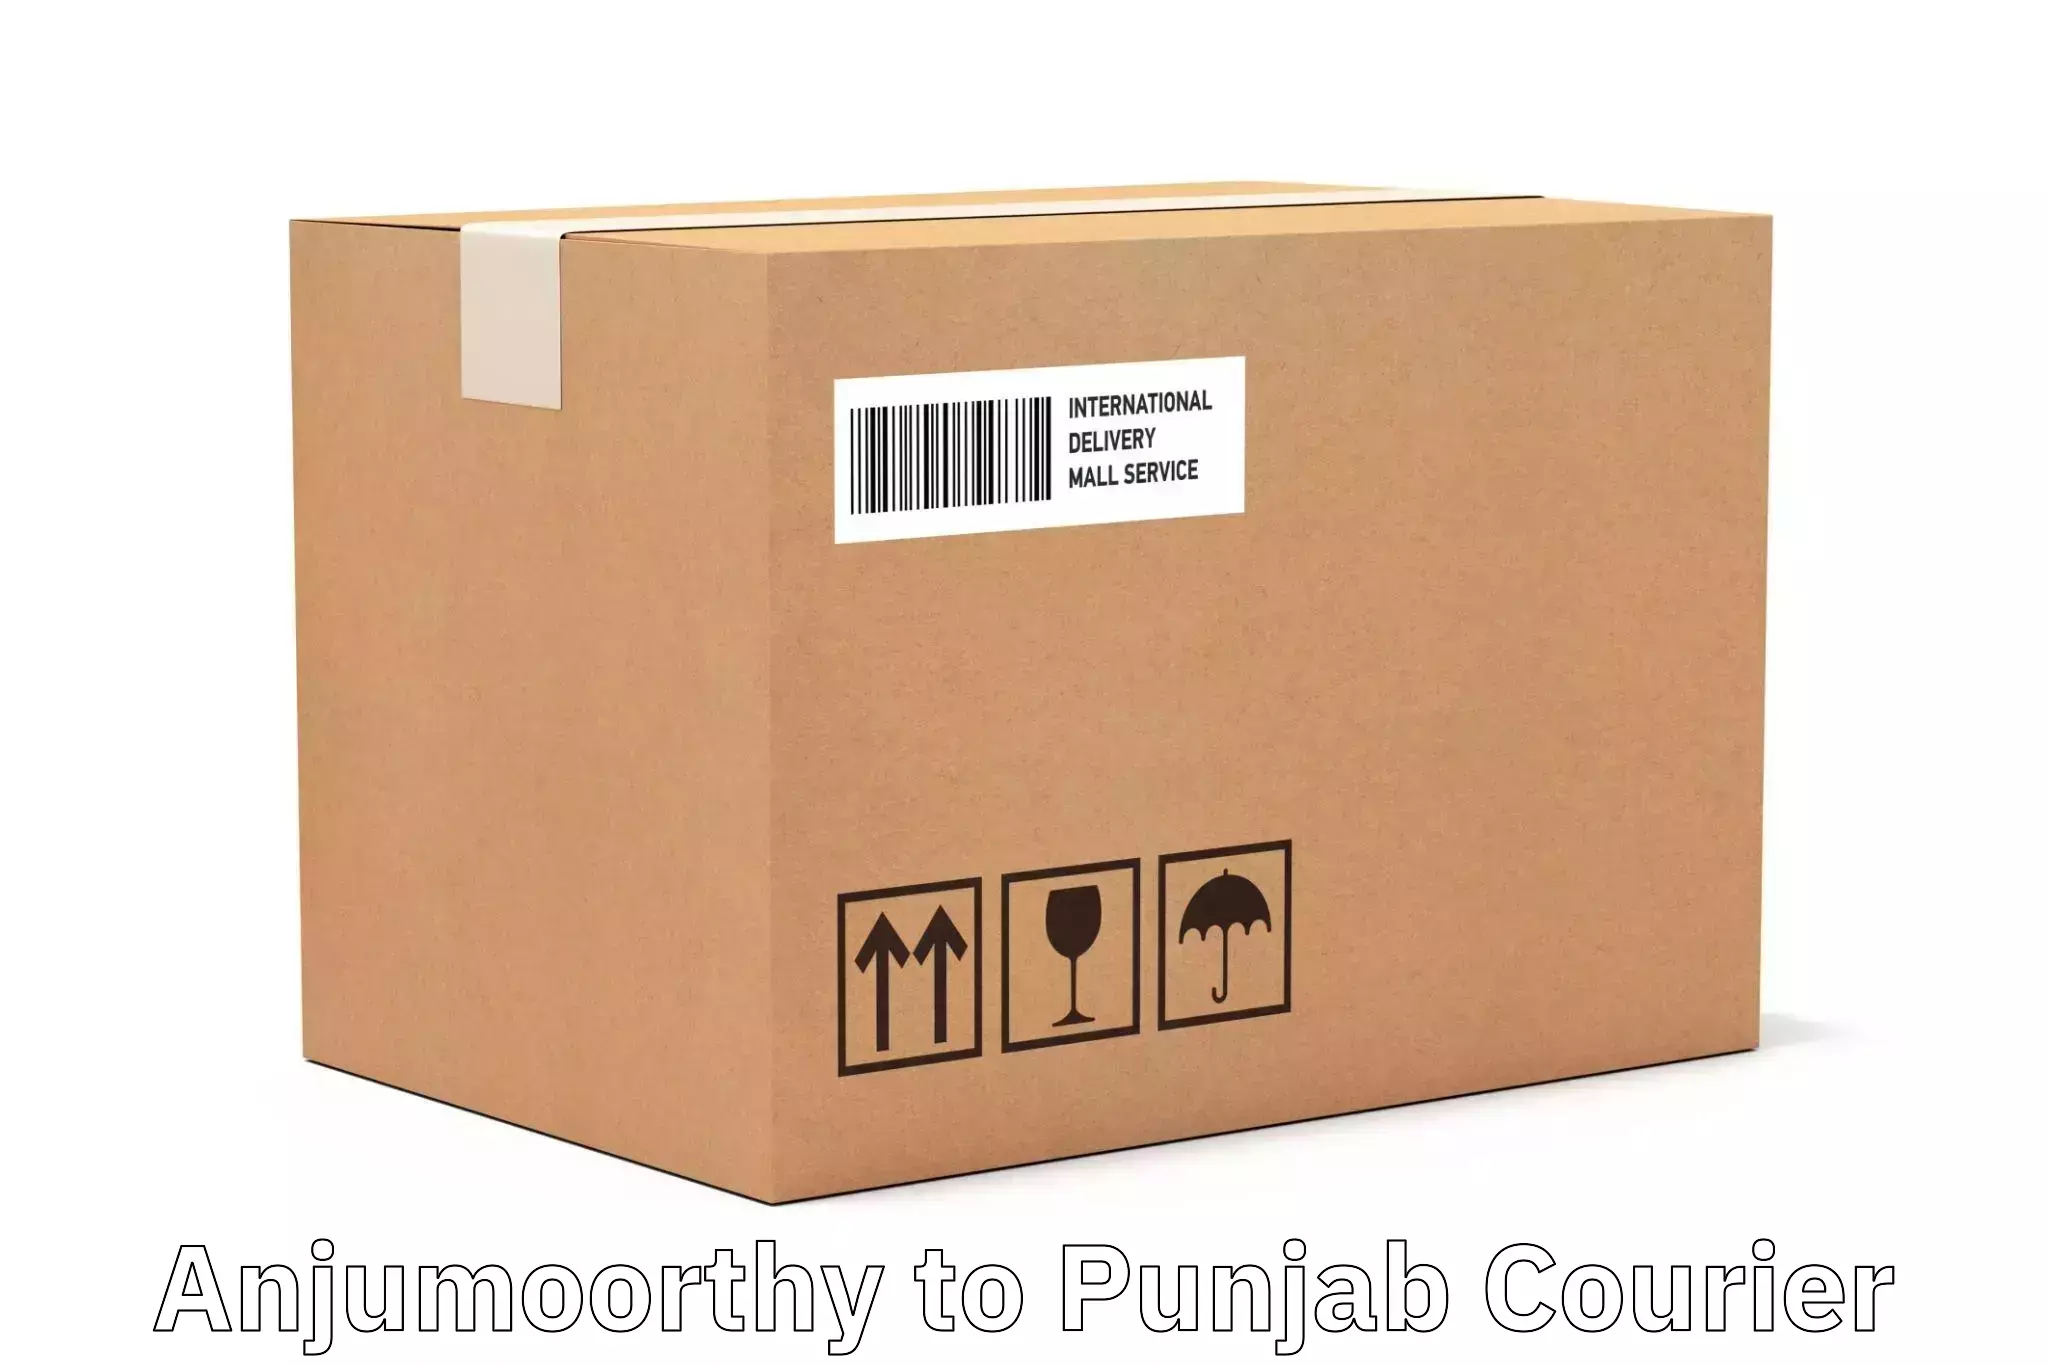 Parcel delivery automation Anjumoorthy to Central University of Punjab Bathinda